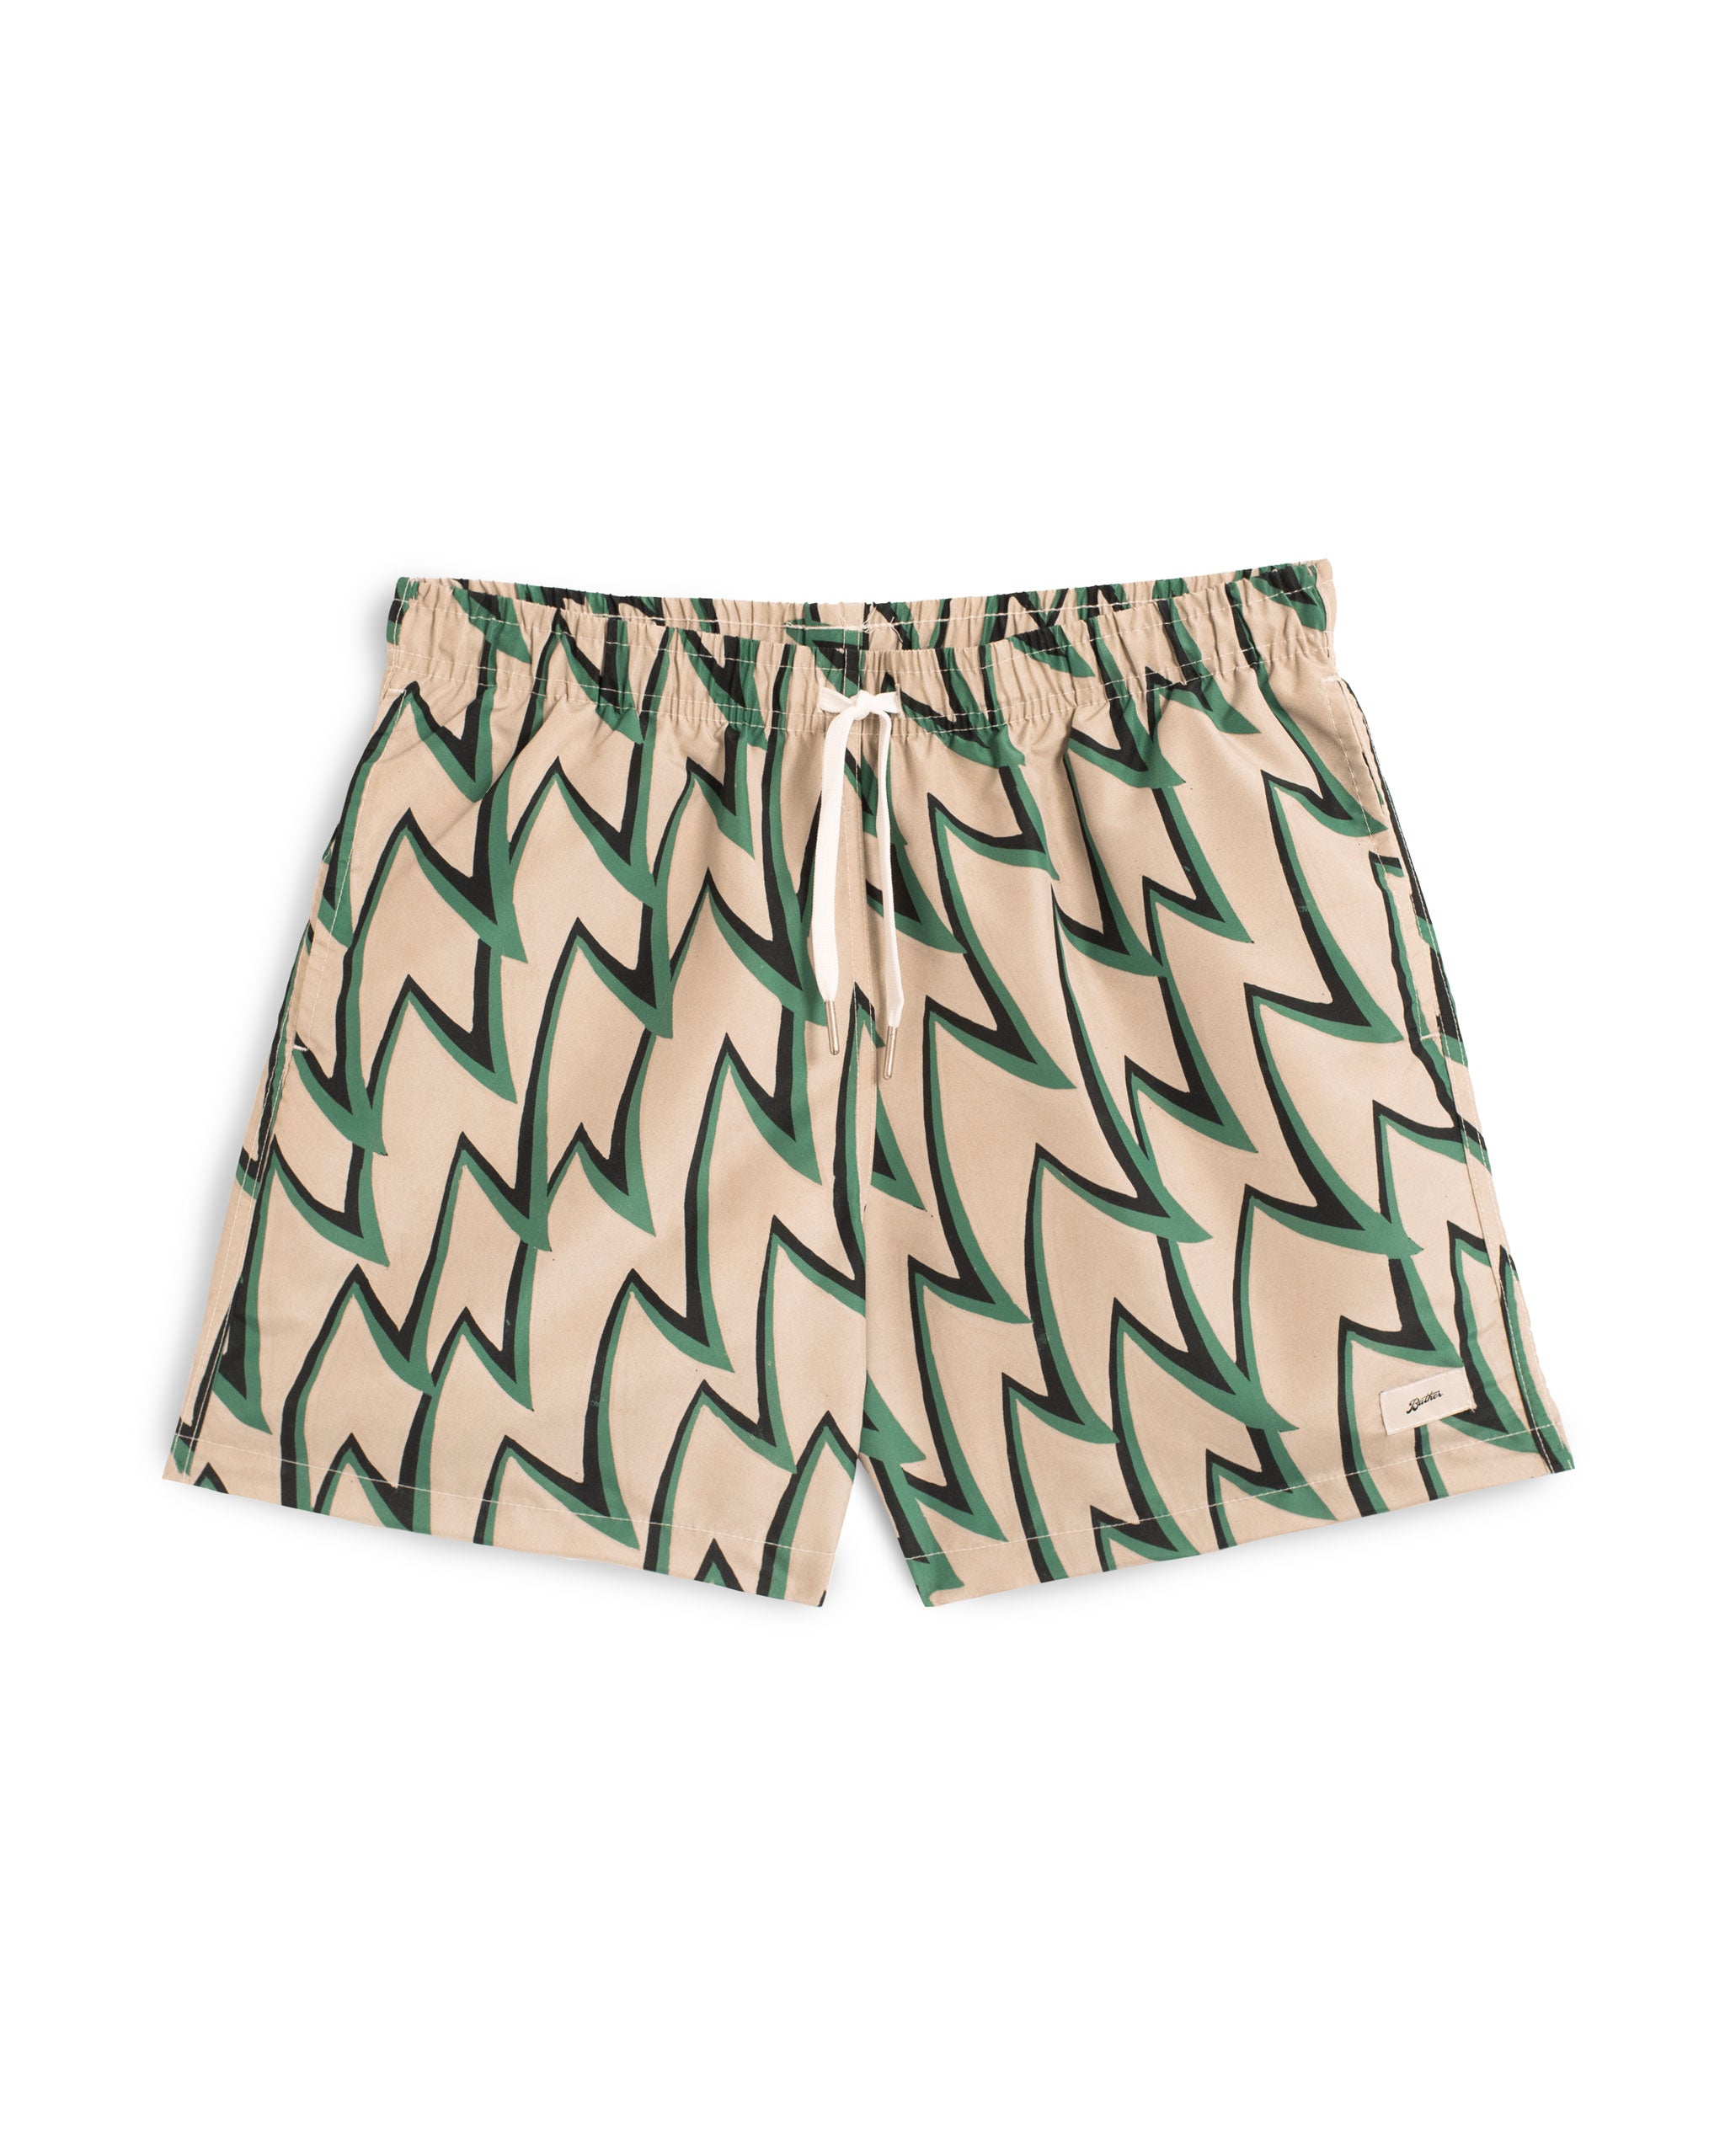 Light brown, green, and black Jagged Frenzy Swim Trunks